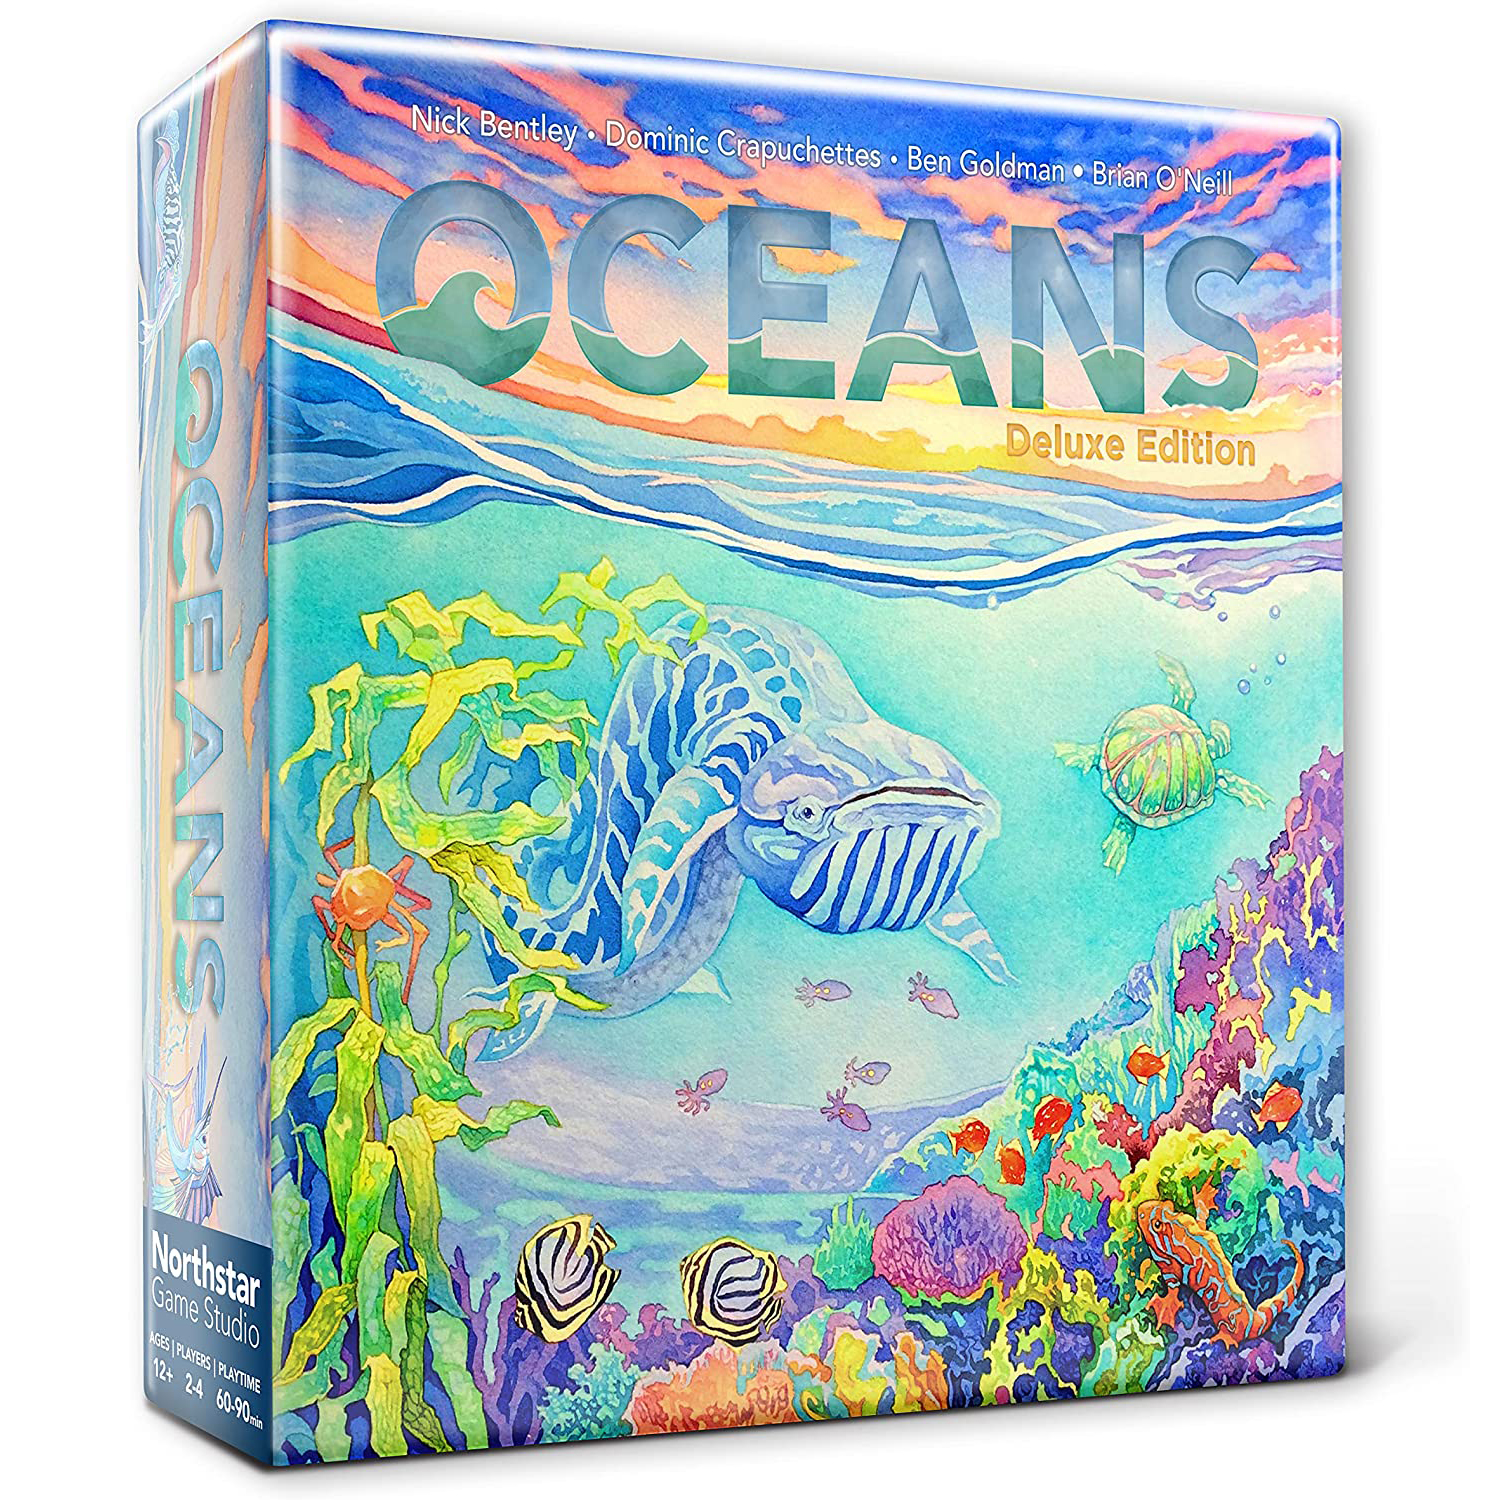 Настольная игра North Star Games Oceans: Deluxe Edition sifu deluxe edition epic games